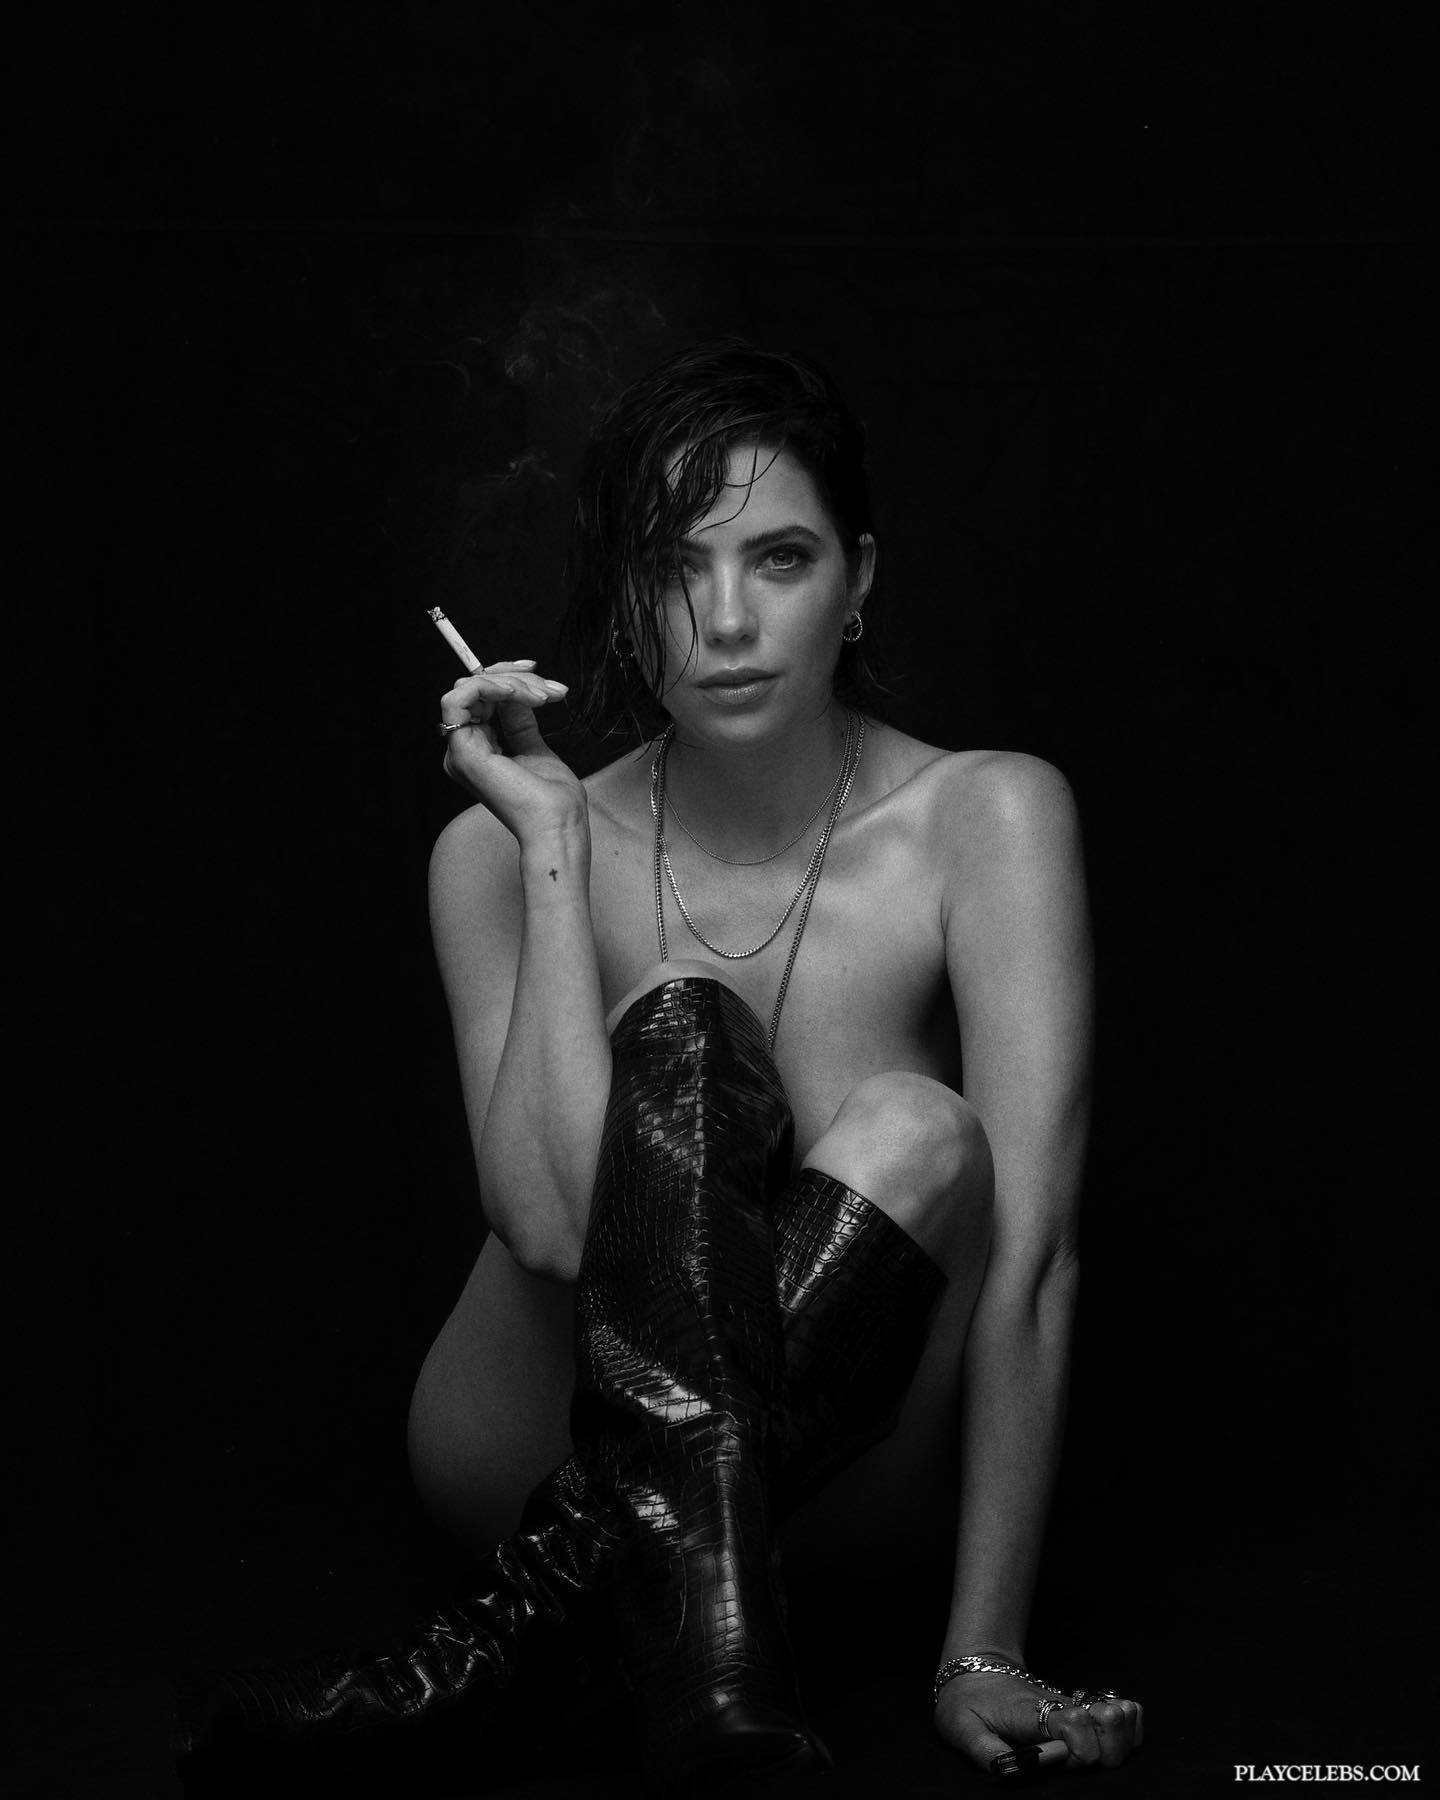 You are currently viewing Ashley Benson New Nude Black & White Photoshoot